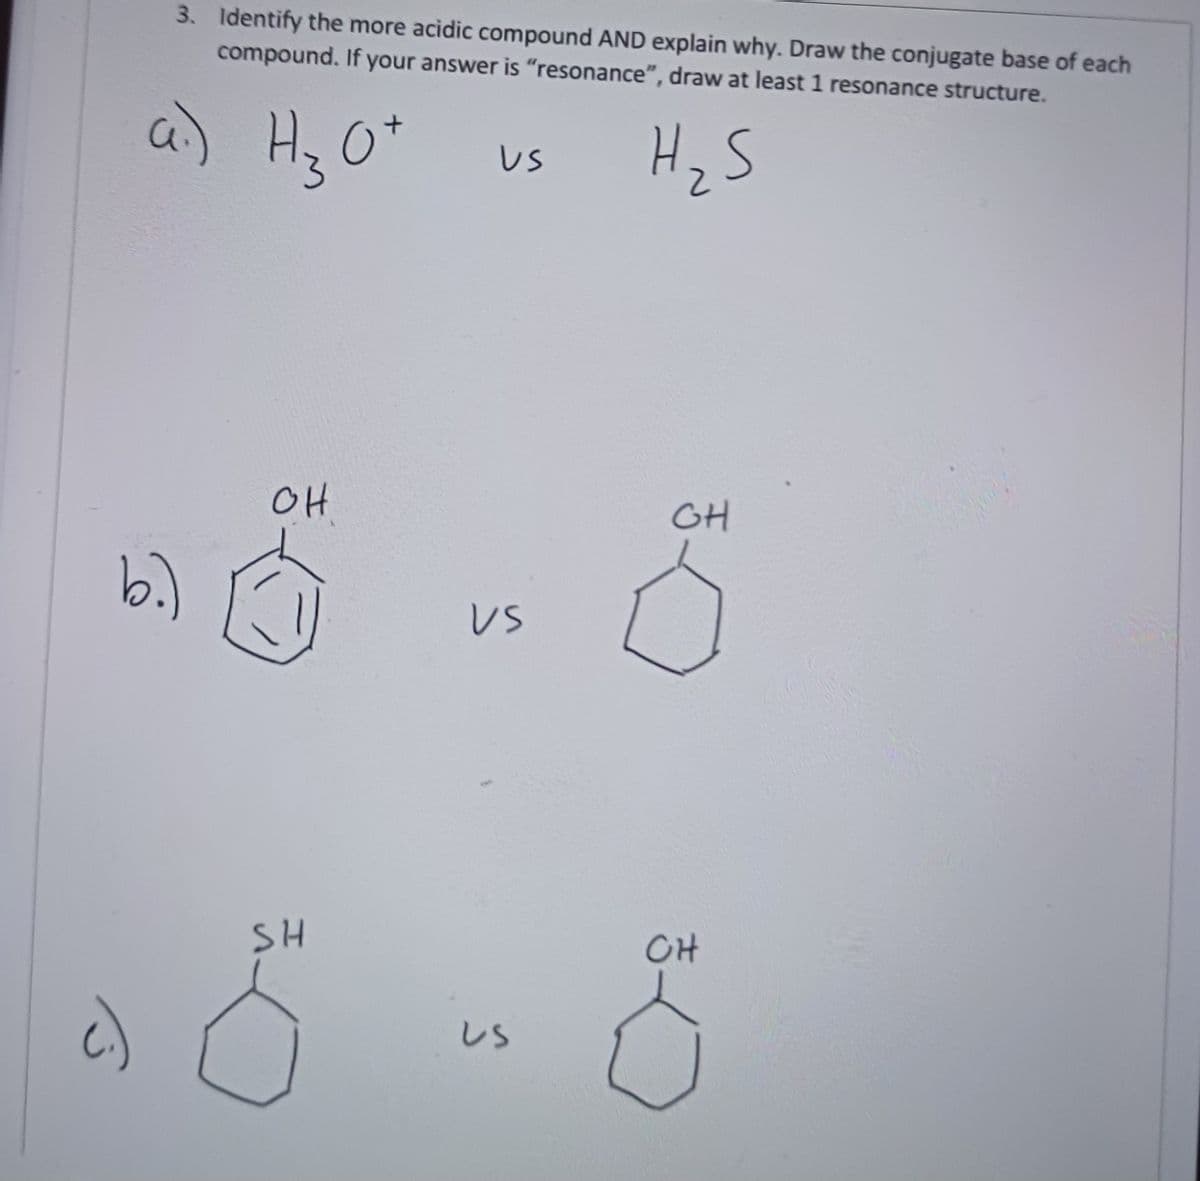 3. Identify the more acidic compound AND explain why. Draw the conjugate base of each
compound. If your answer is "resonance", draw at least 1 resonance structure.
H₂S
a.) Hz Ot
+
b.)
OH
SH
US
US
US
GH
CH
8